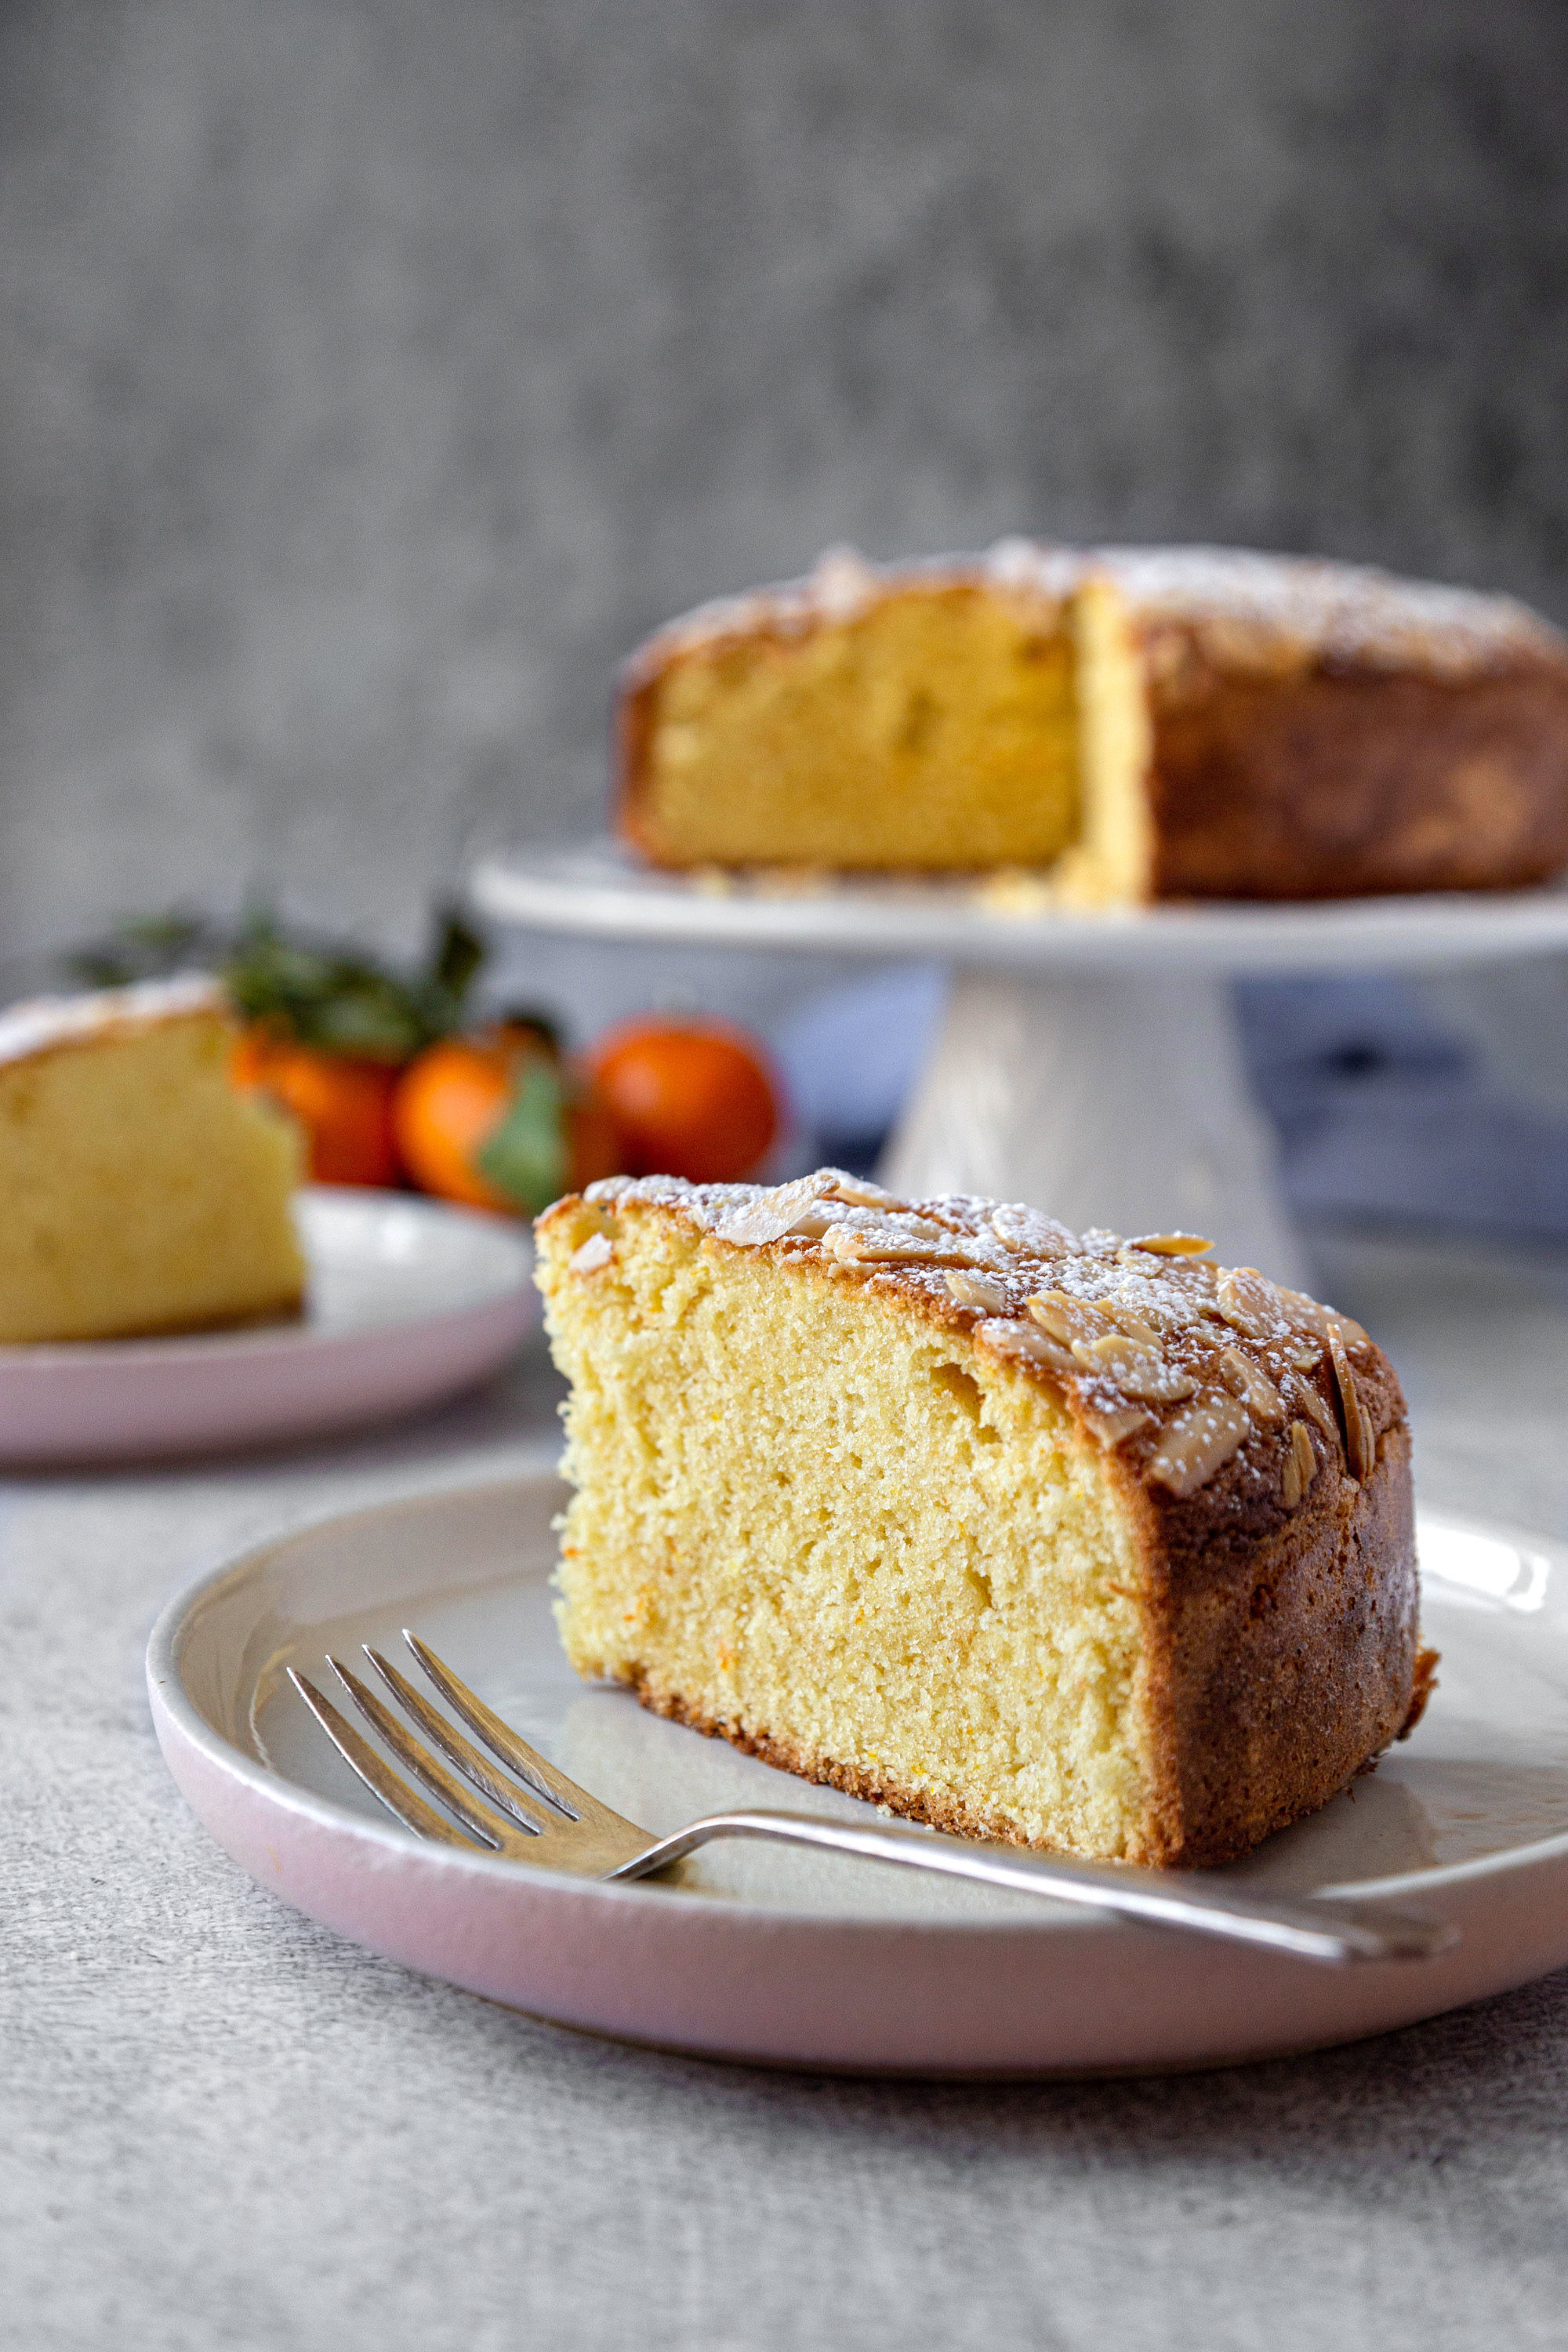 A slice of orange blossom cake on a grey plate with silver fork